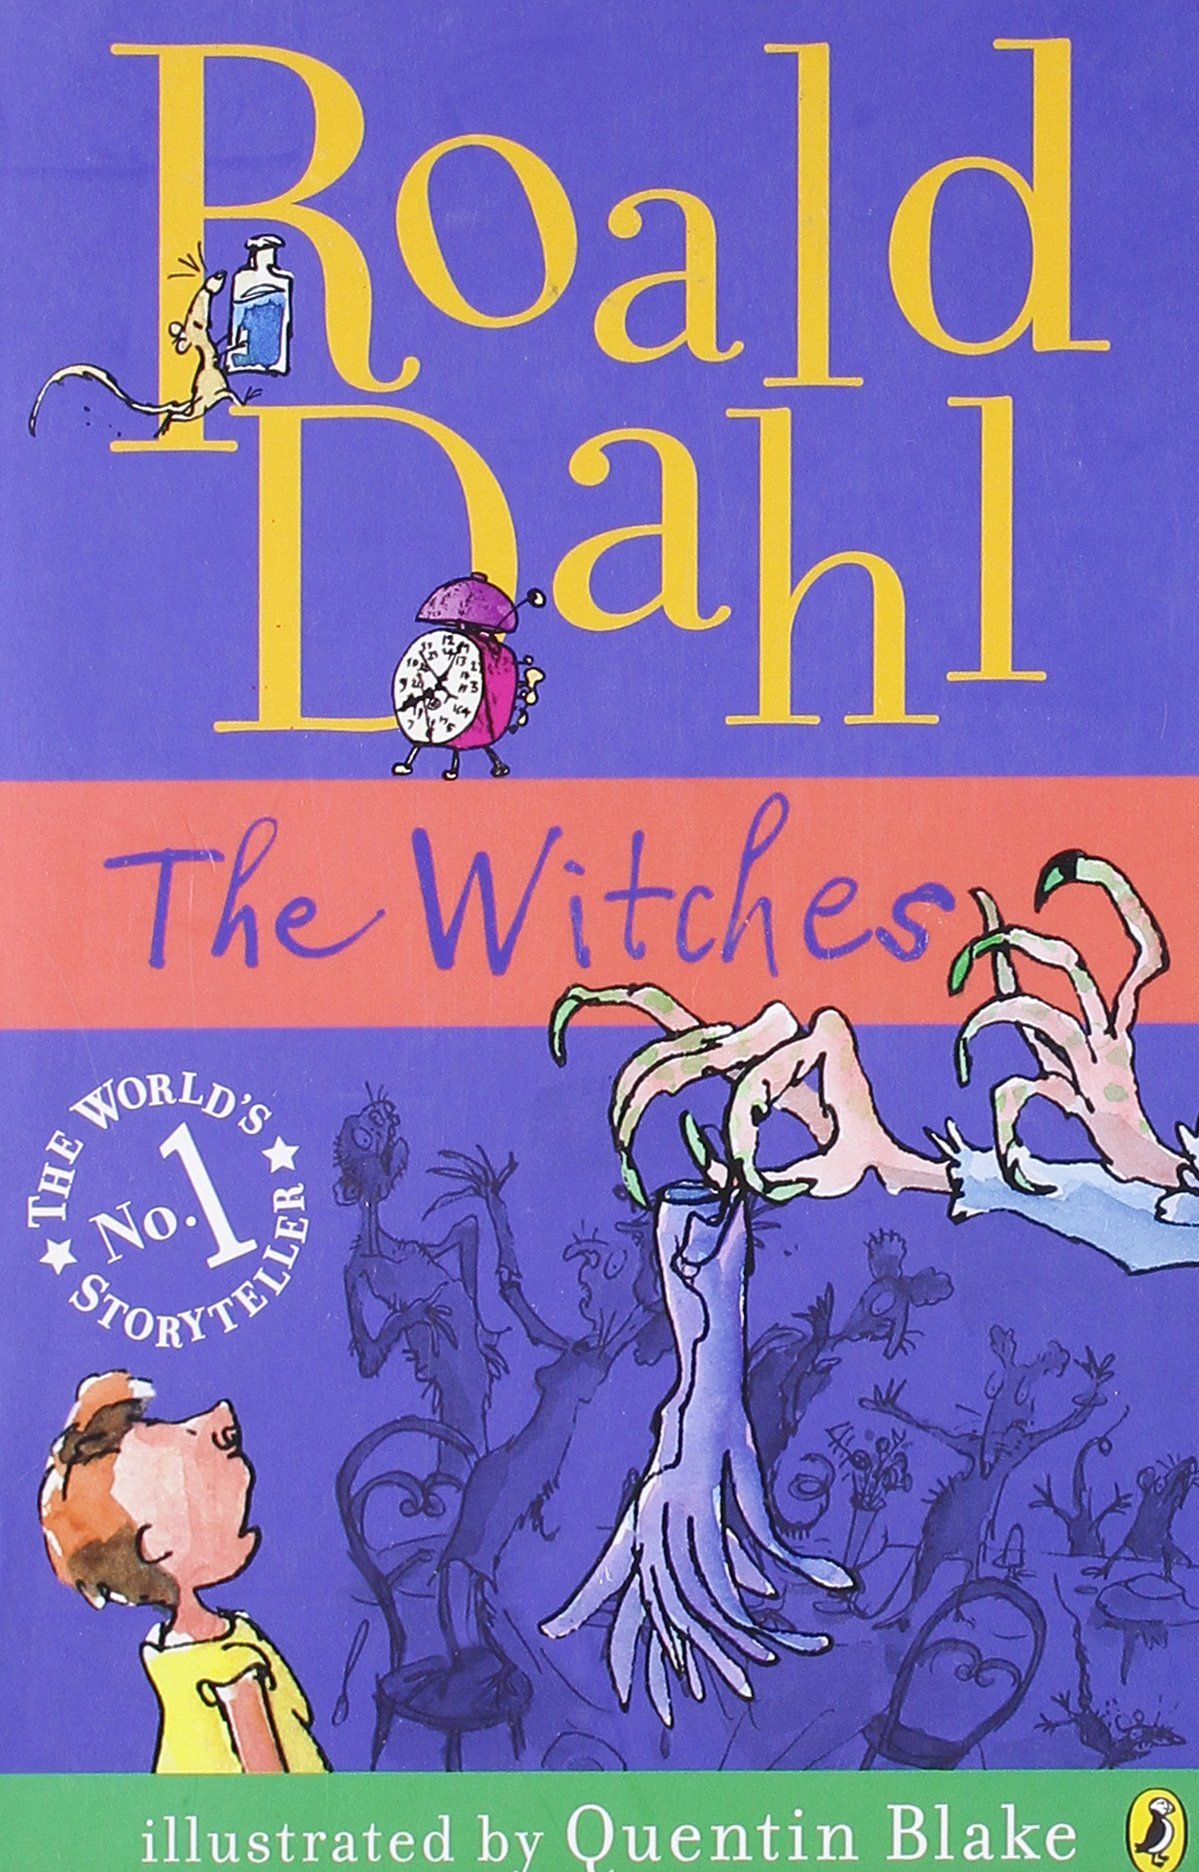 THE WITCHES